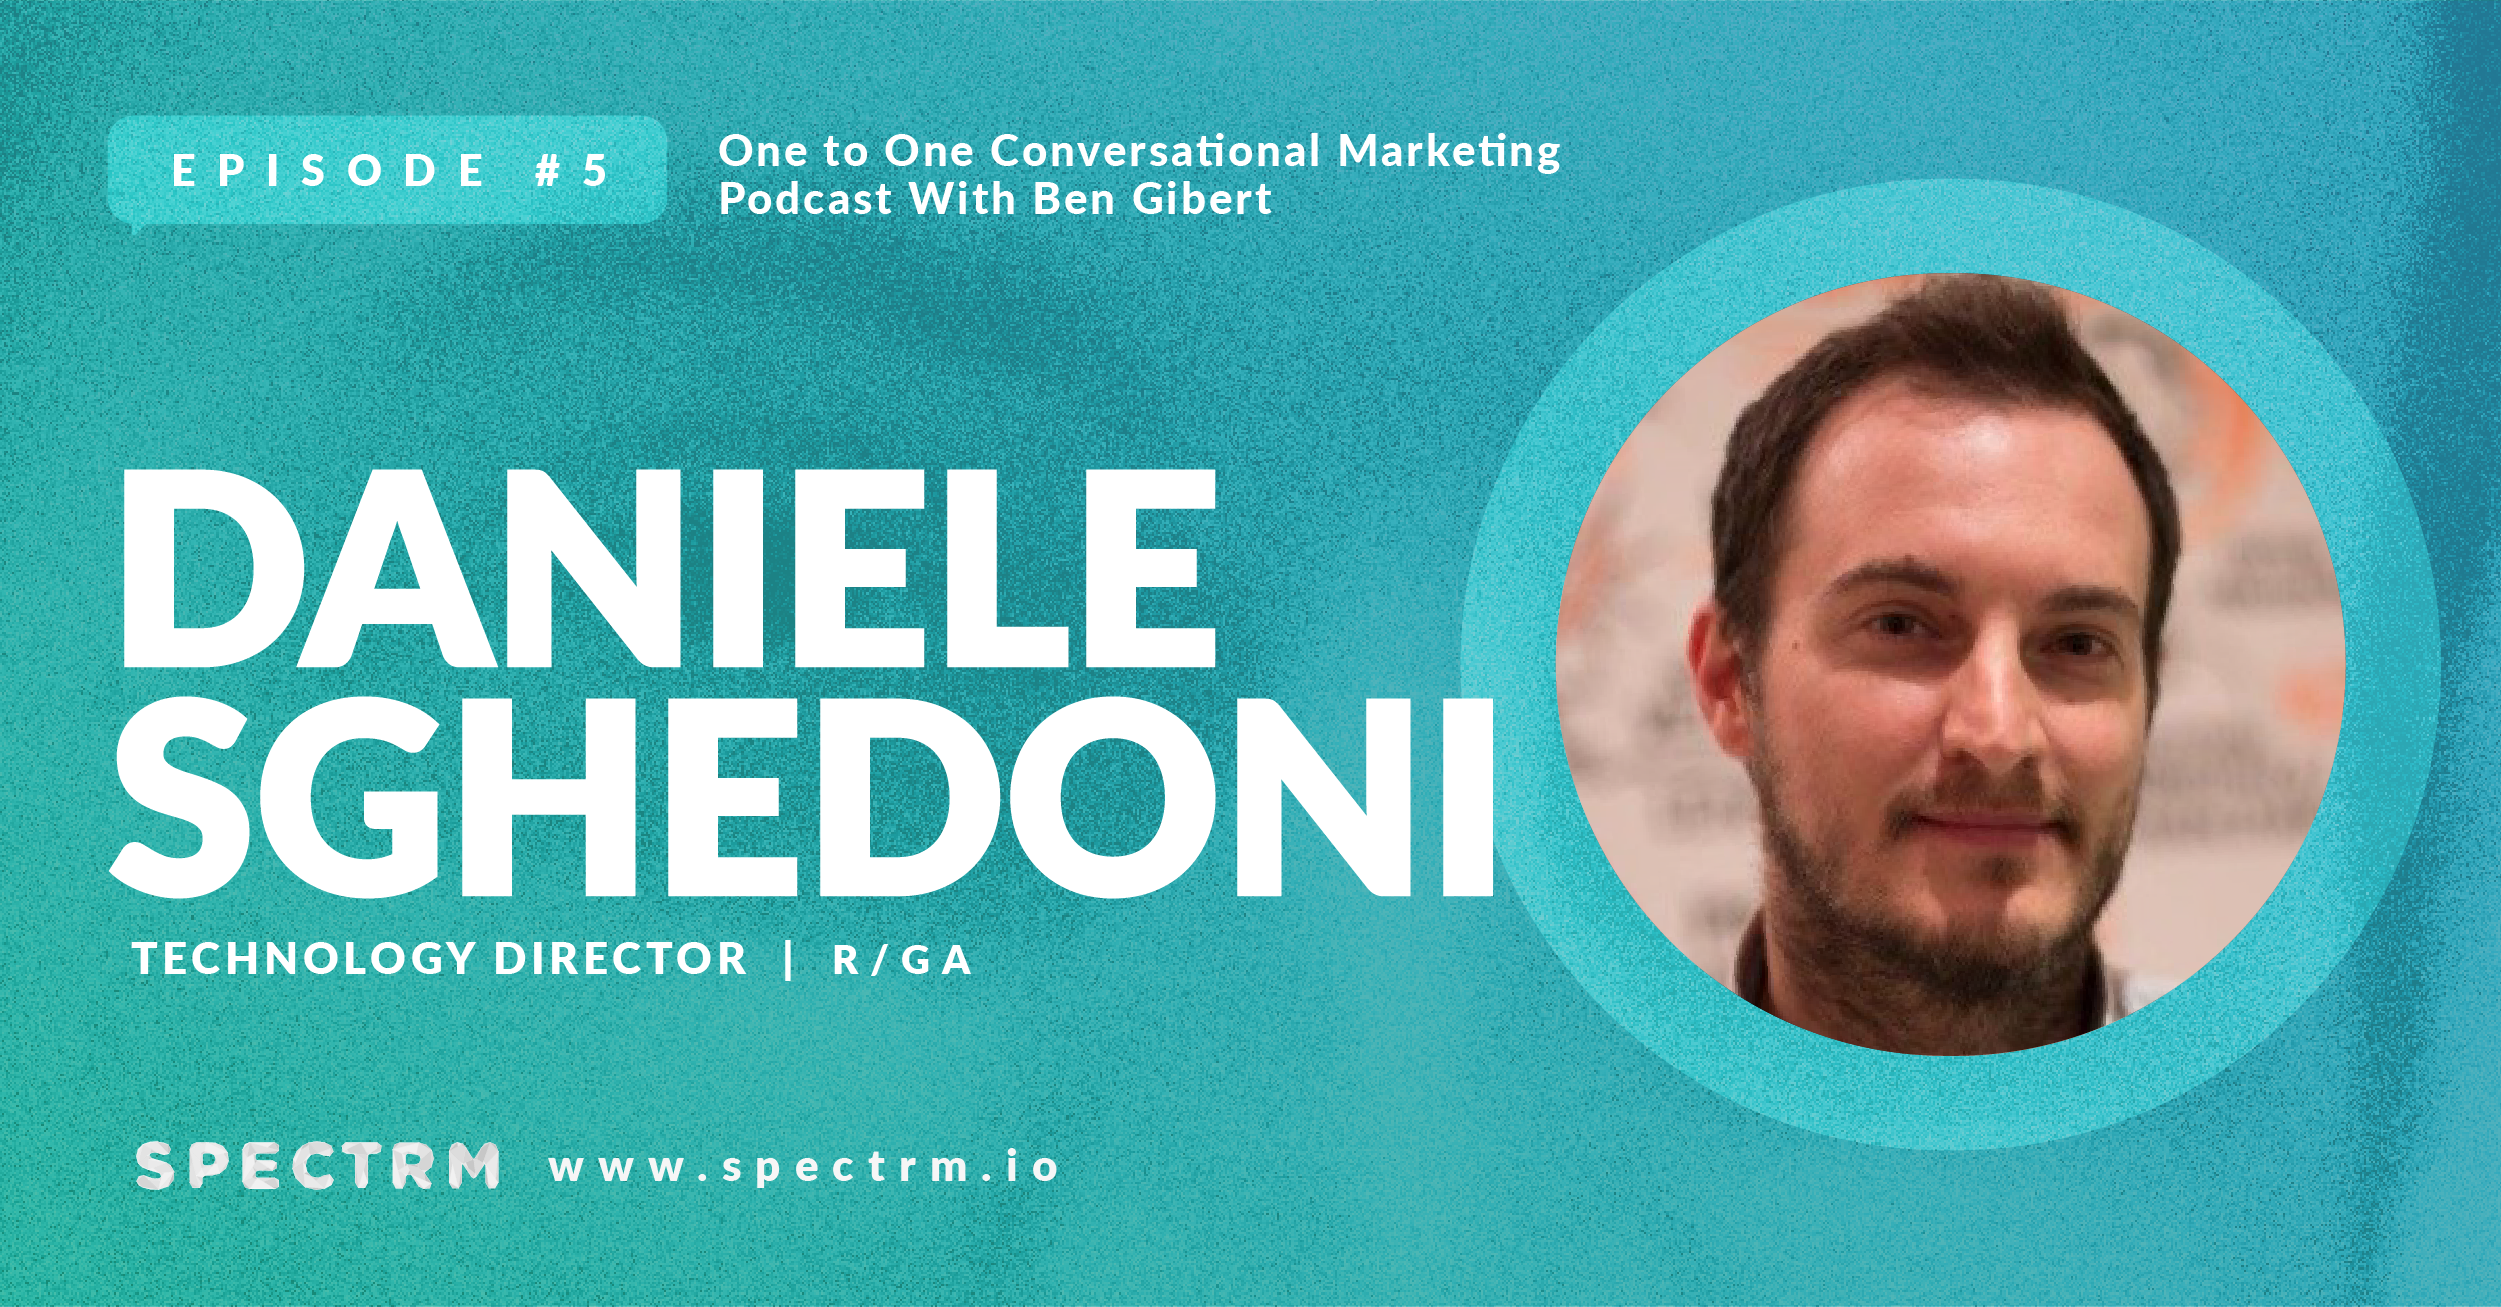 podcast with daniele sghedoni